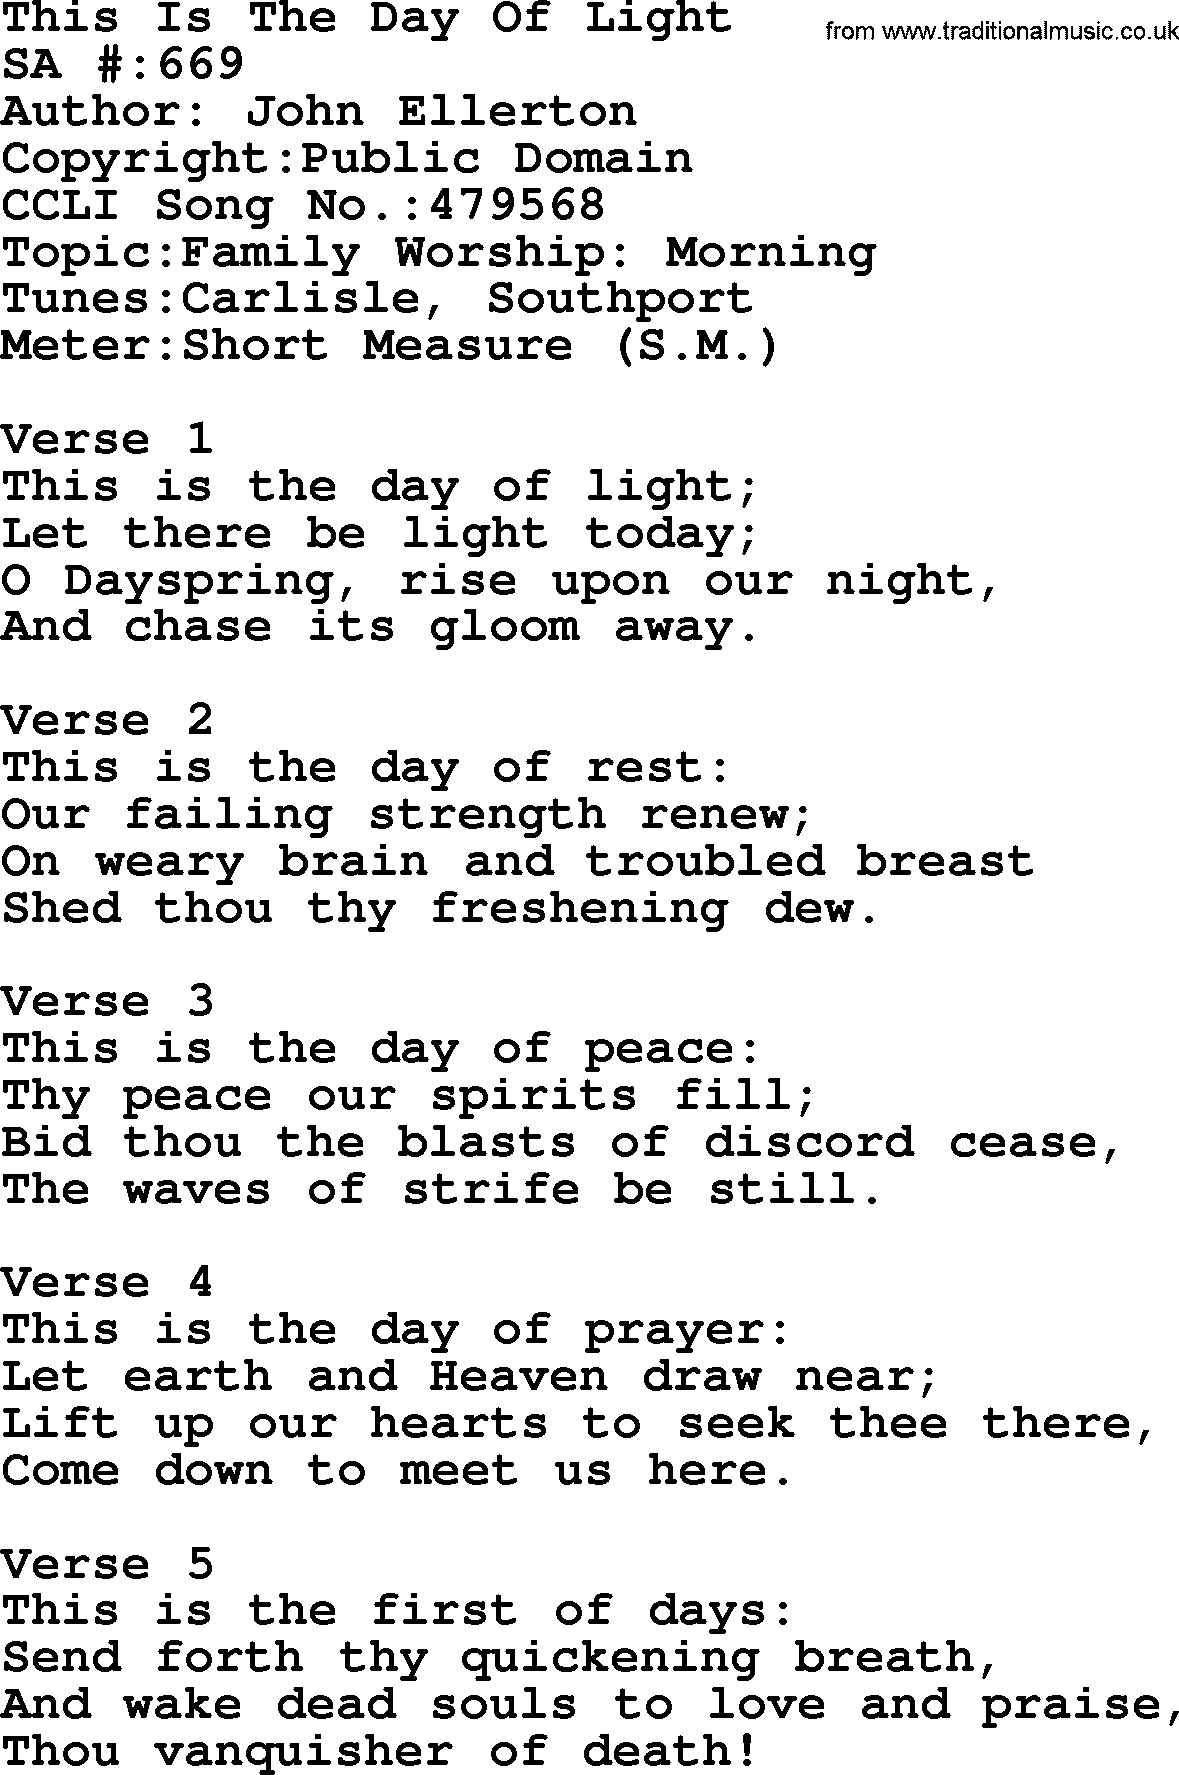 Salvation Army Hymnal, title: This Is The Day Of Light, with lyrics and PDF,